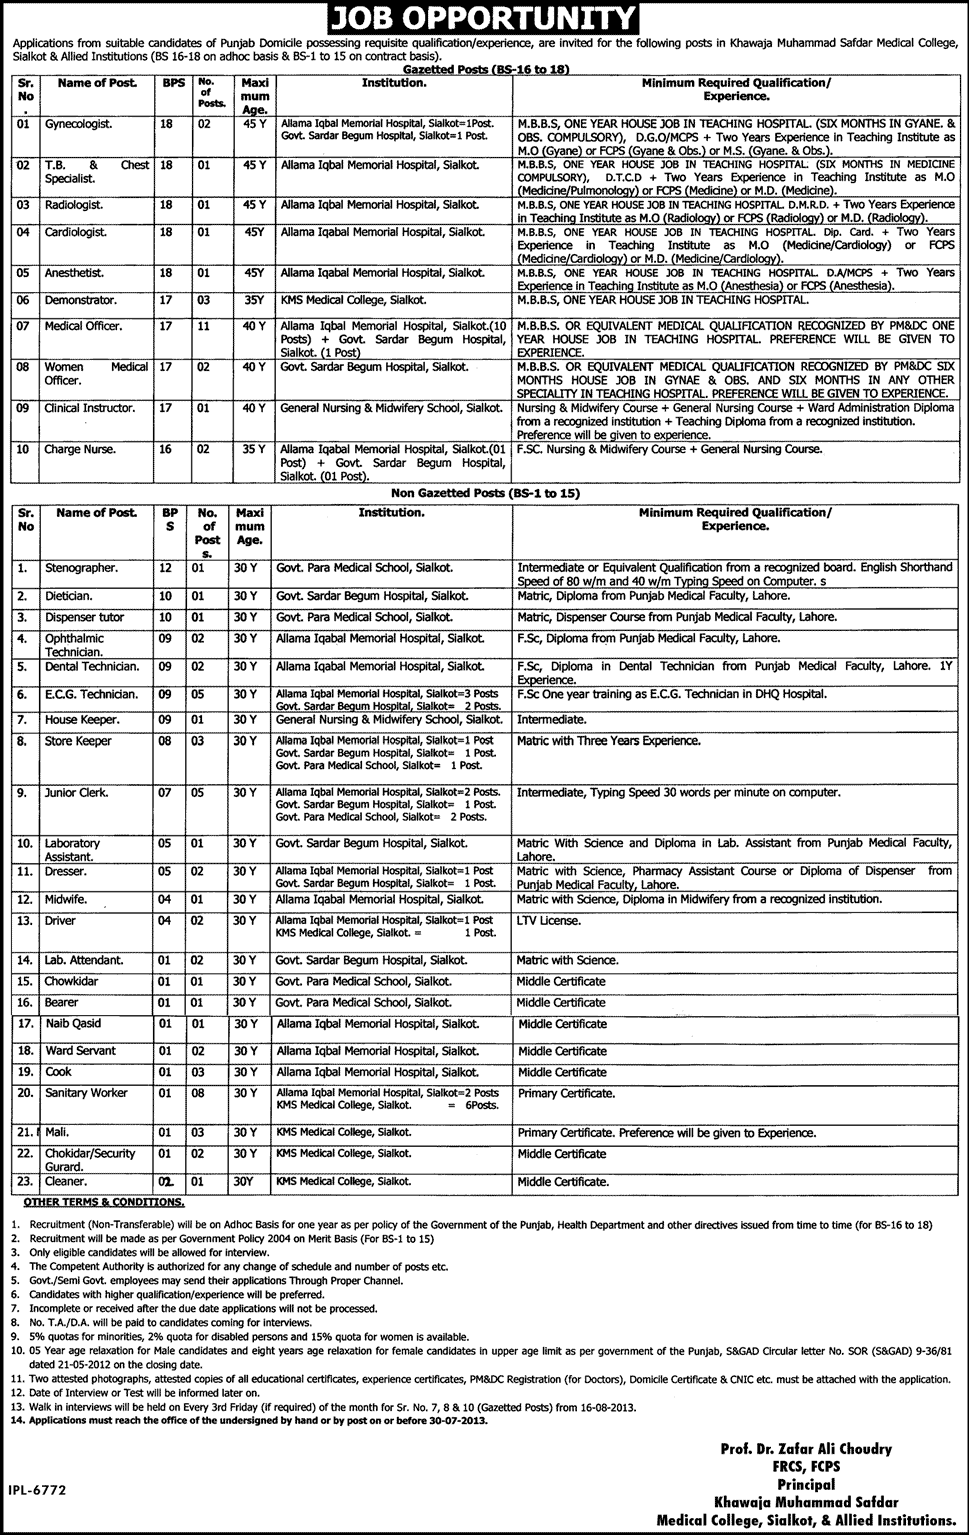 Khawaja Muhammad Safdar Medical College Sialkot Jobs 2013 July KMSMC / KMS & Allied Institutions Latest Ad